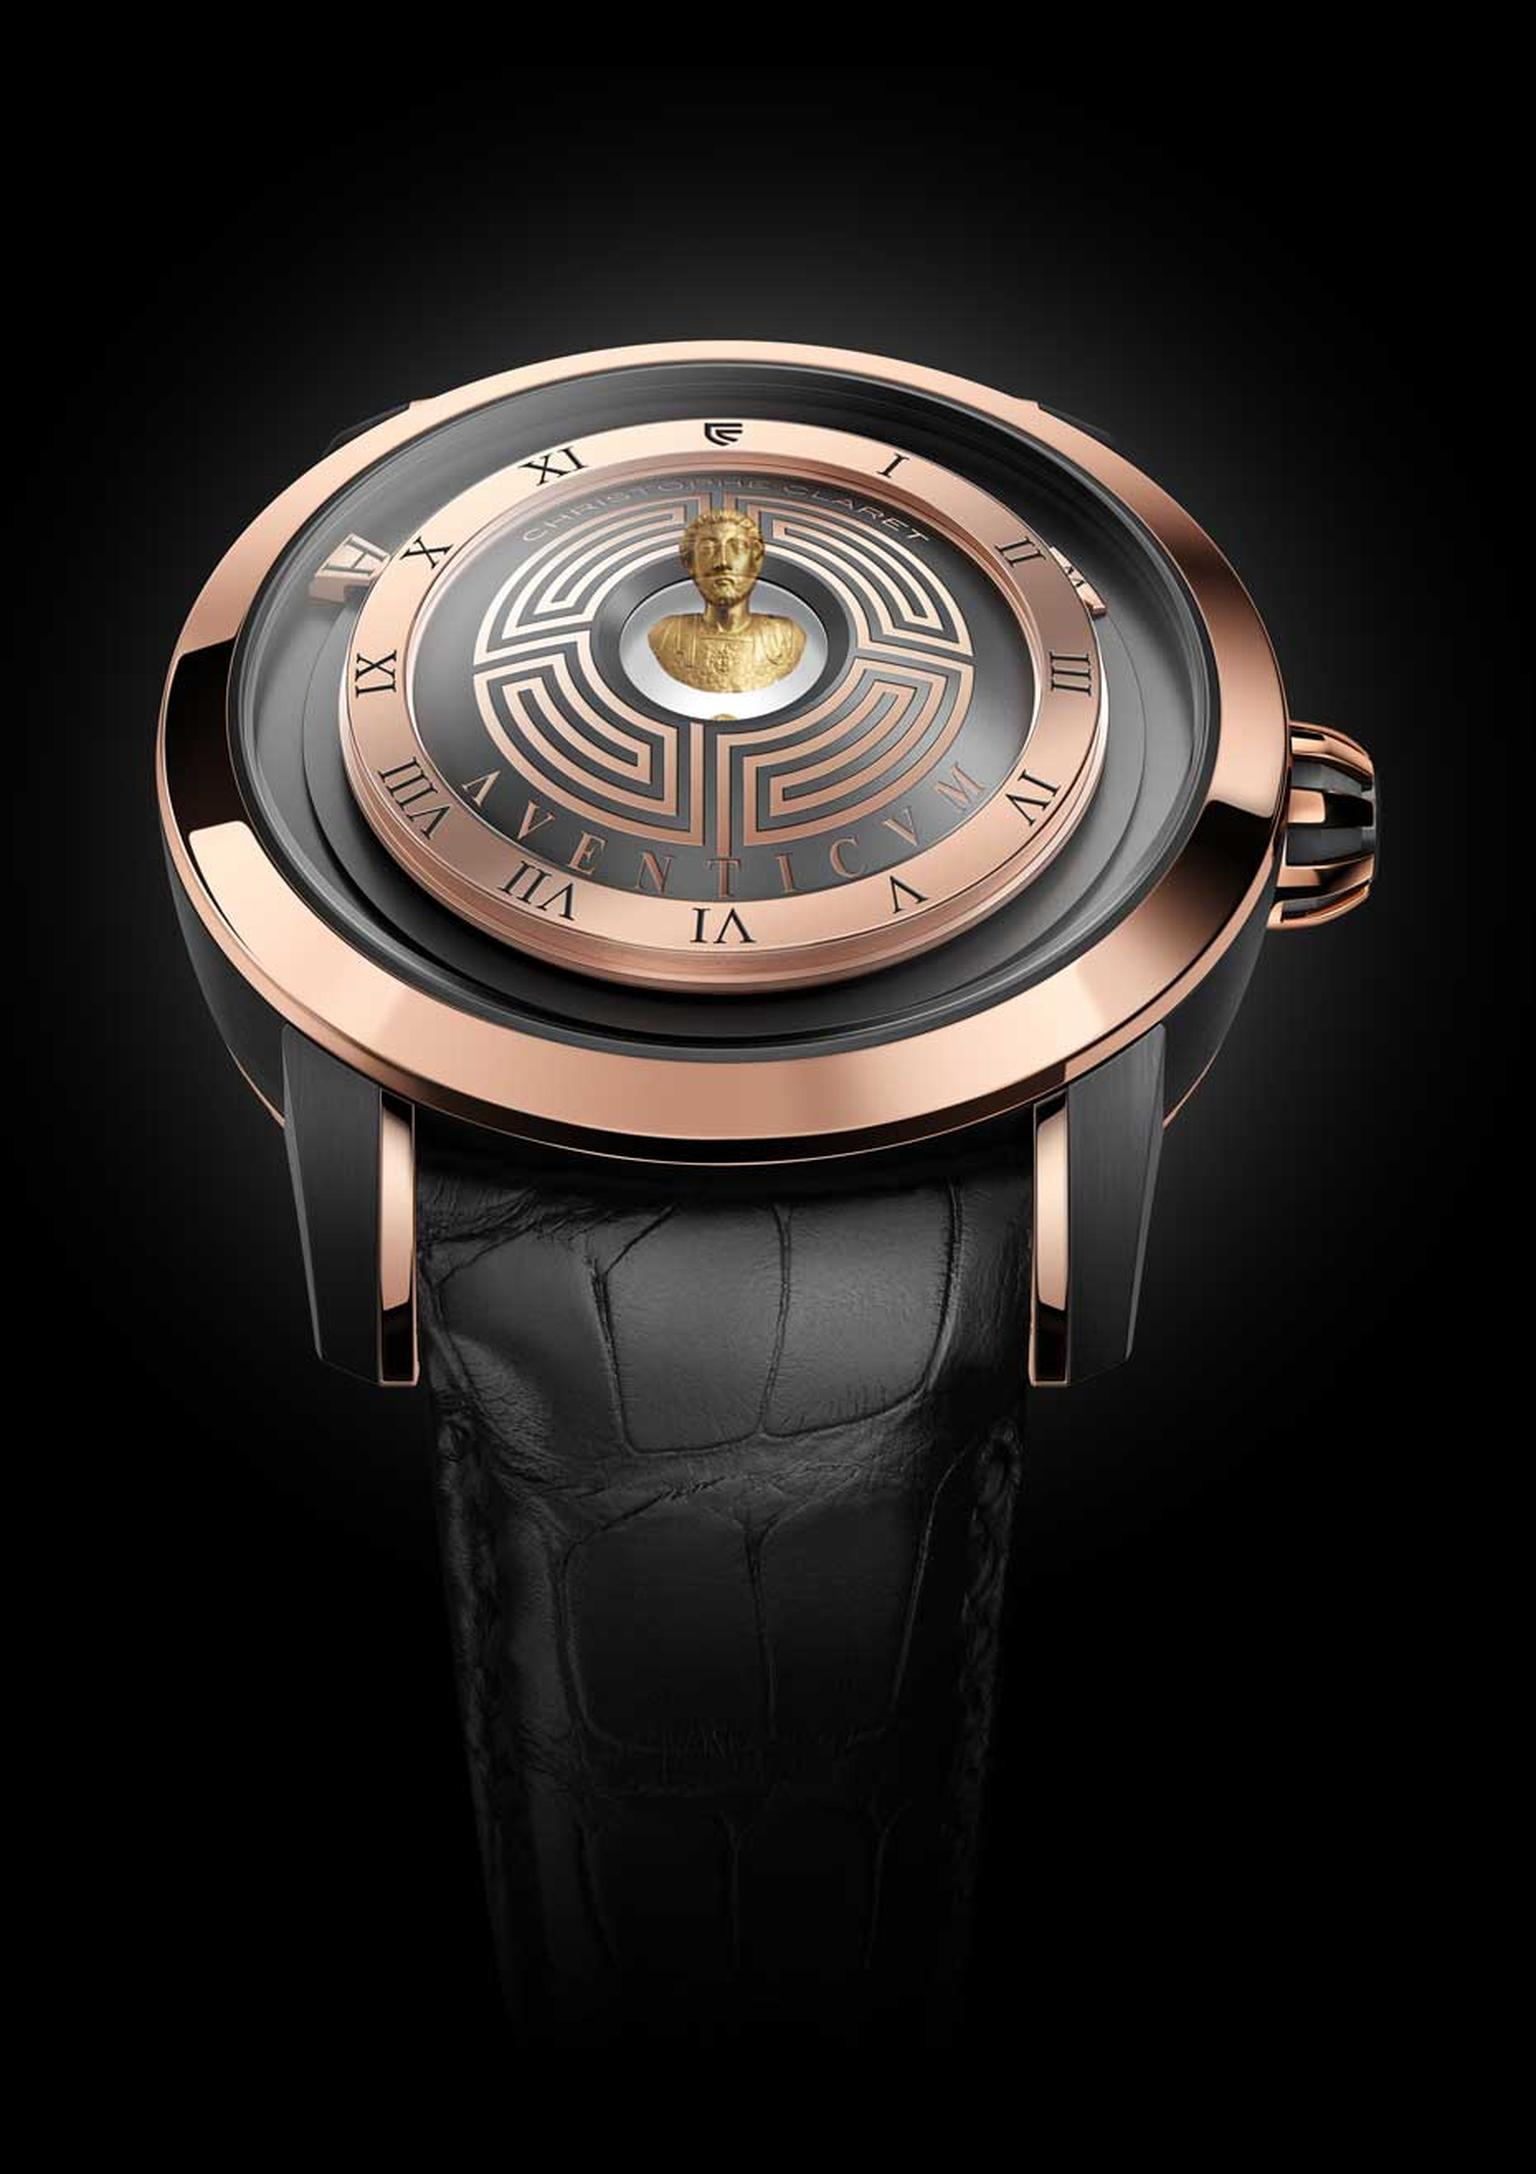 The Christophe Claret Aventicum watch features a gold replica of the bust of Marcus Aurelius, measuring less than 3mm, in the centre of a dial.